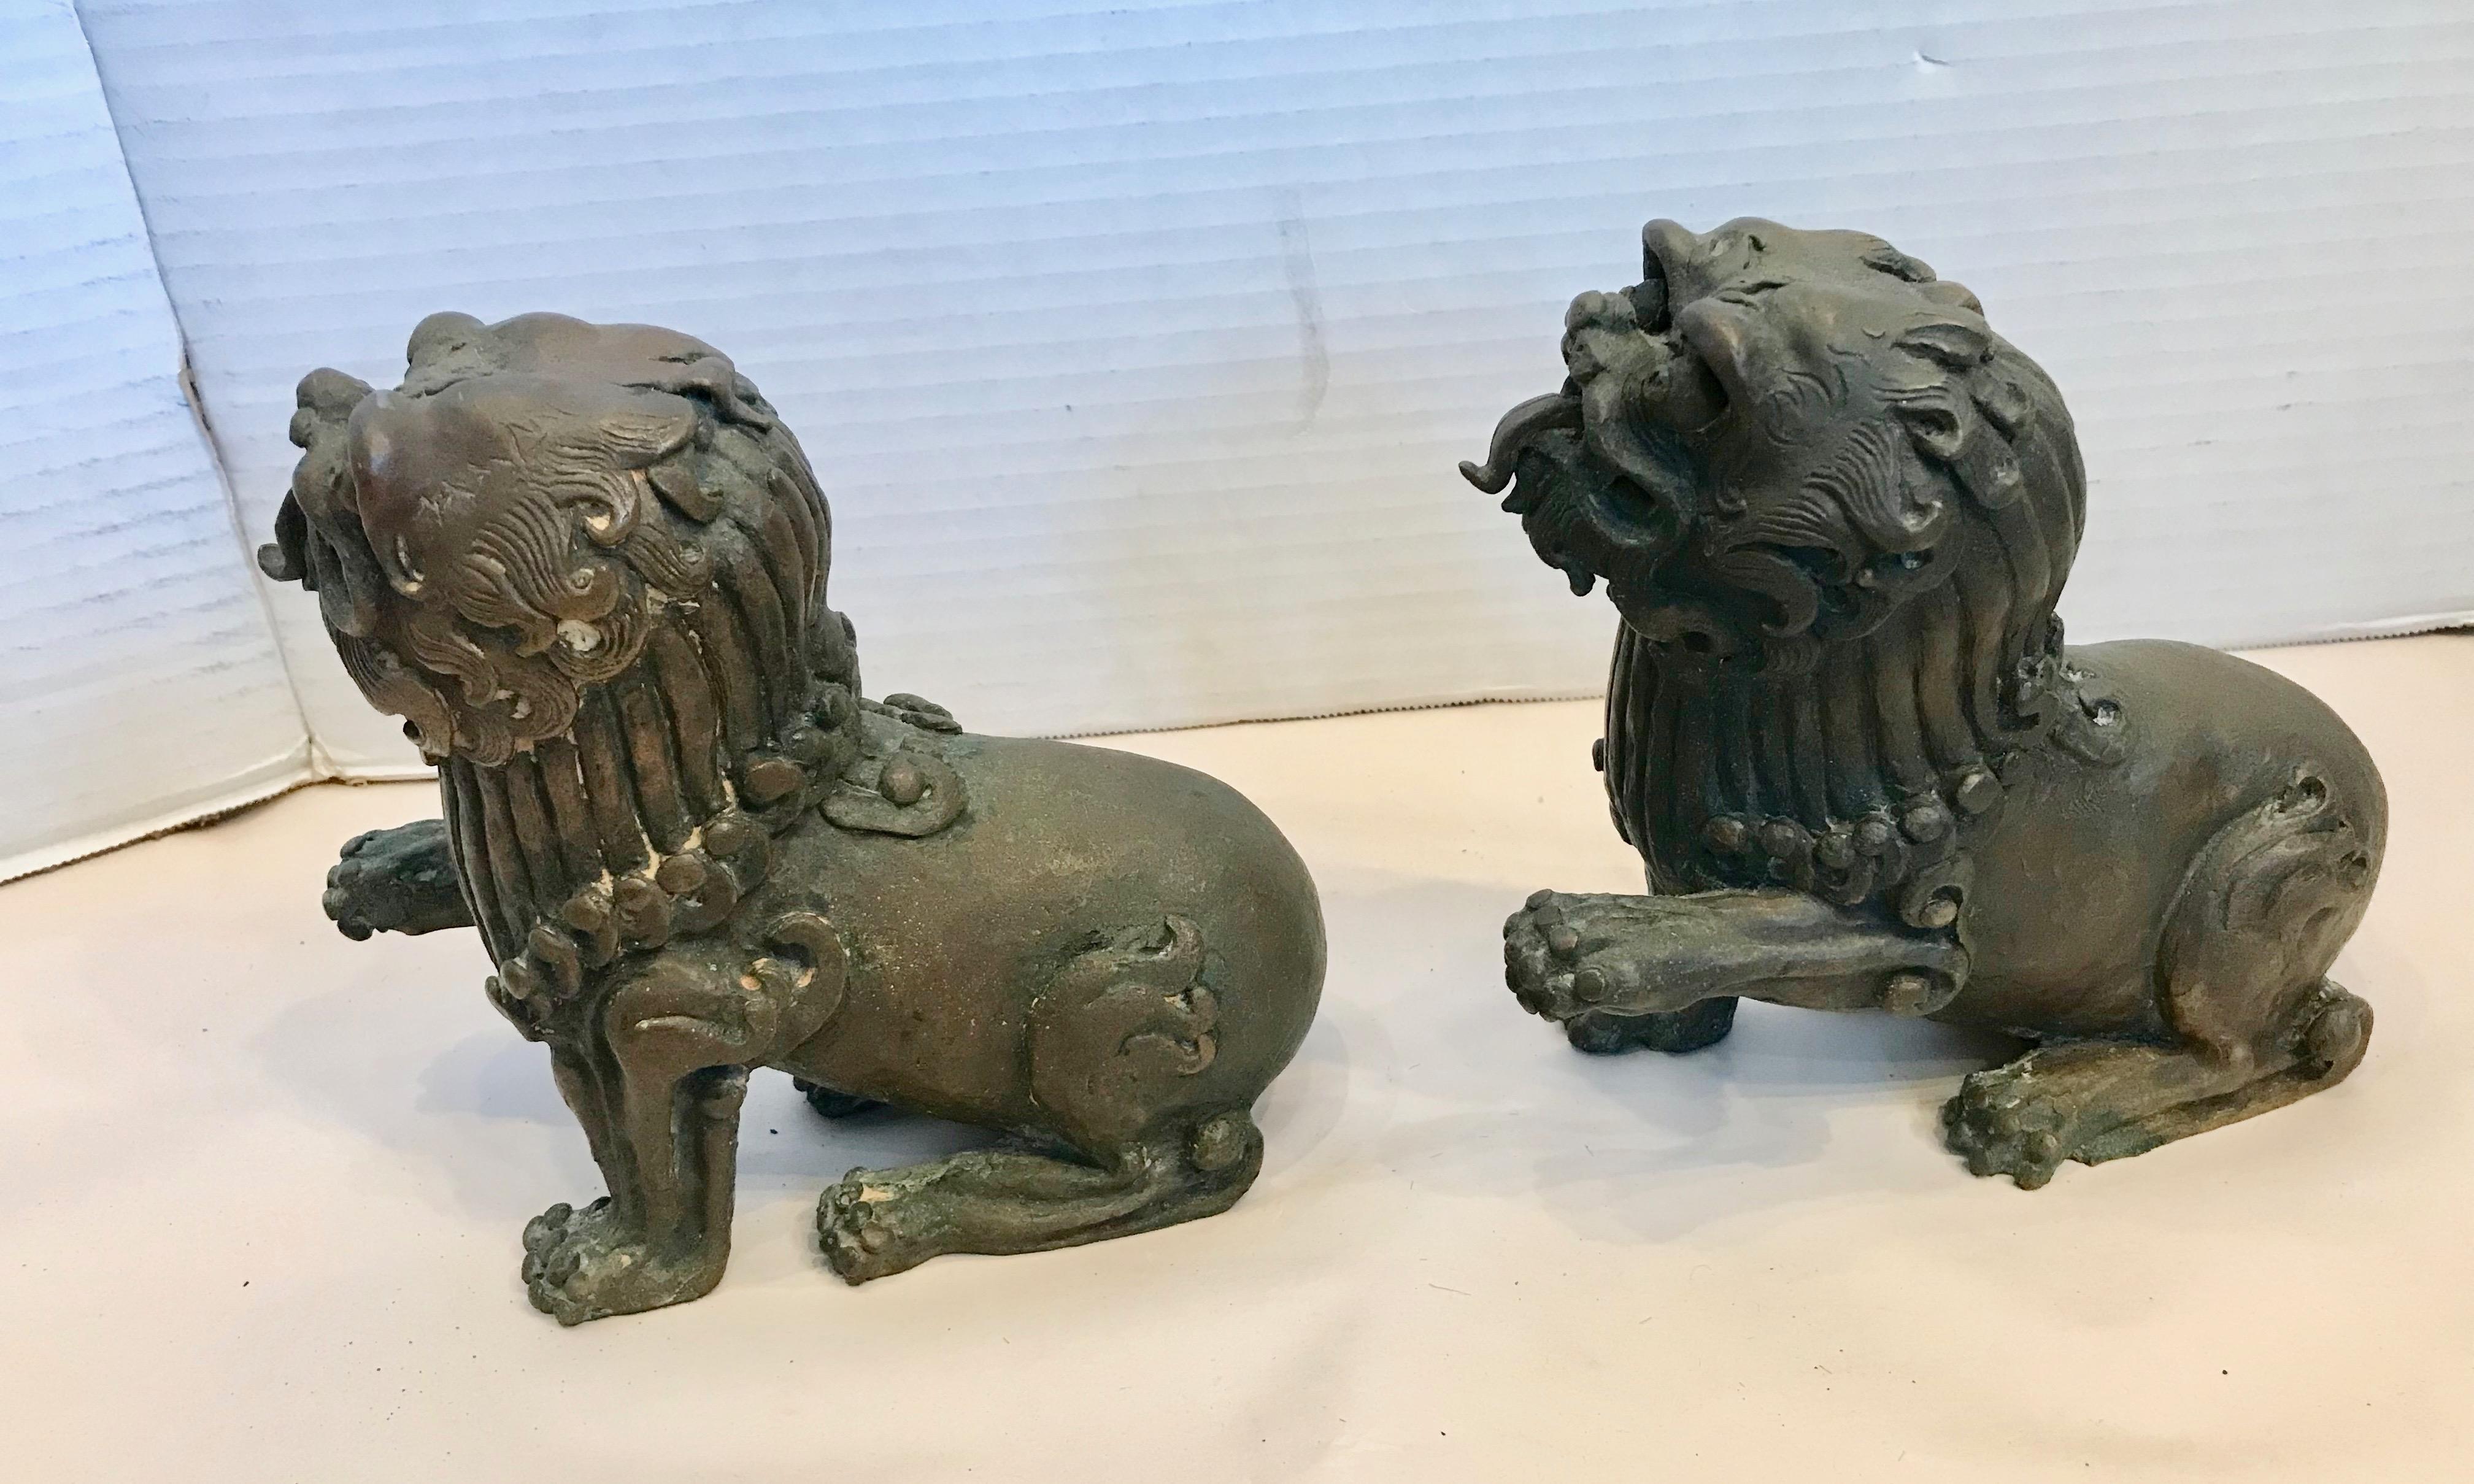 A proper pair - right and left facing. The bronzes have expressive faces
with protruding tongues and are posed with paws raised to indicate 
that they are at attention.
An outstanding and unusual pair.